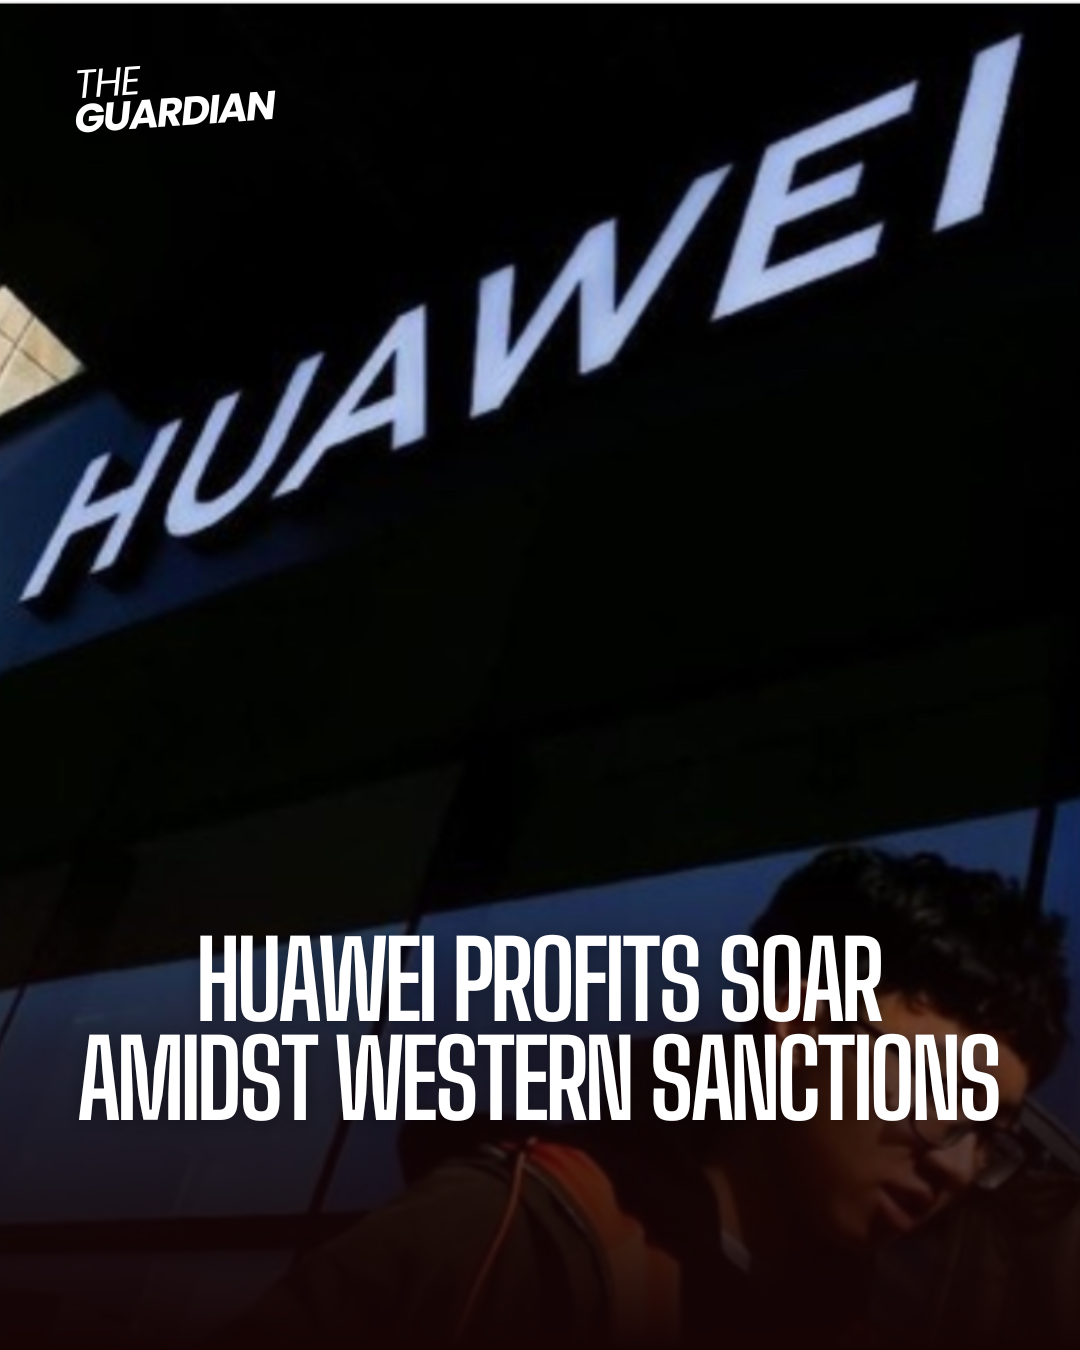 Huawei has claimed a spectacular profit jump, driven by effective measures to gain market share.